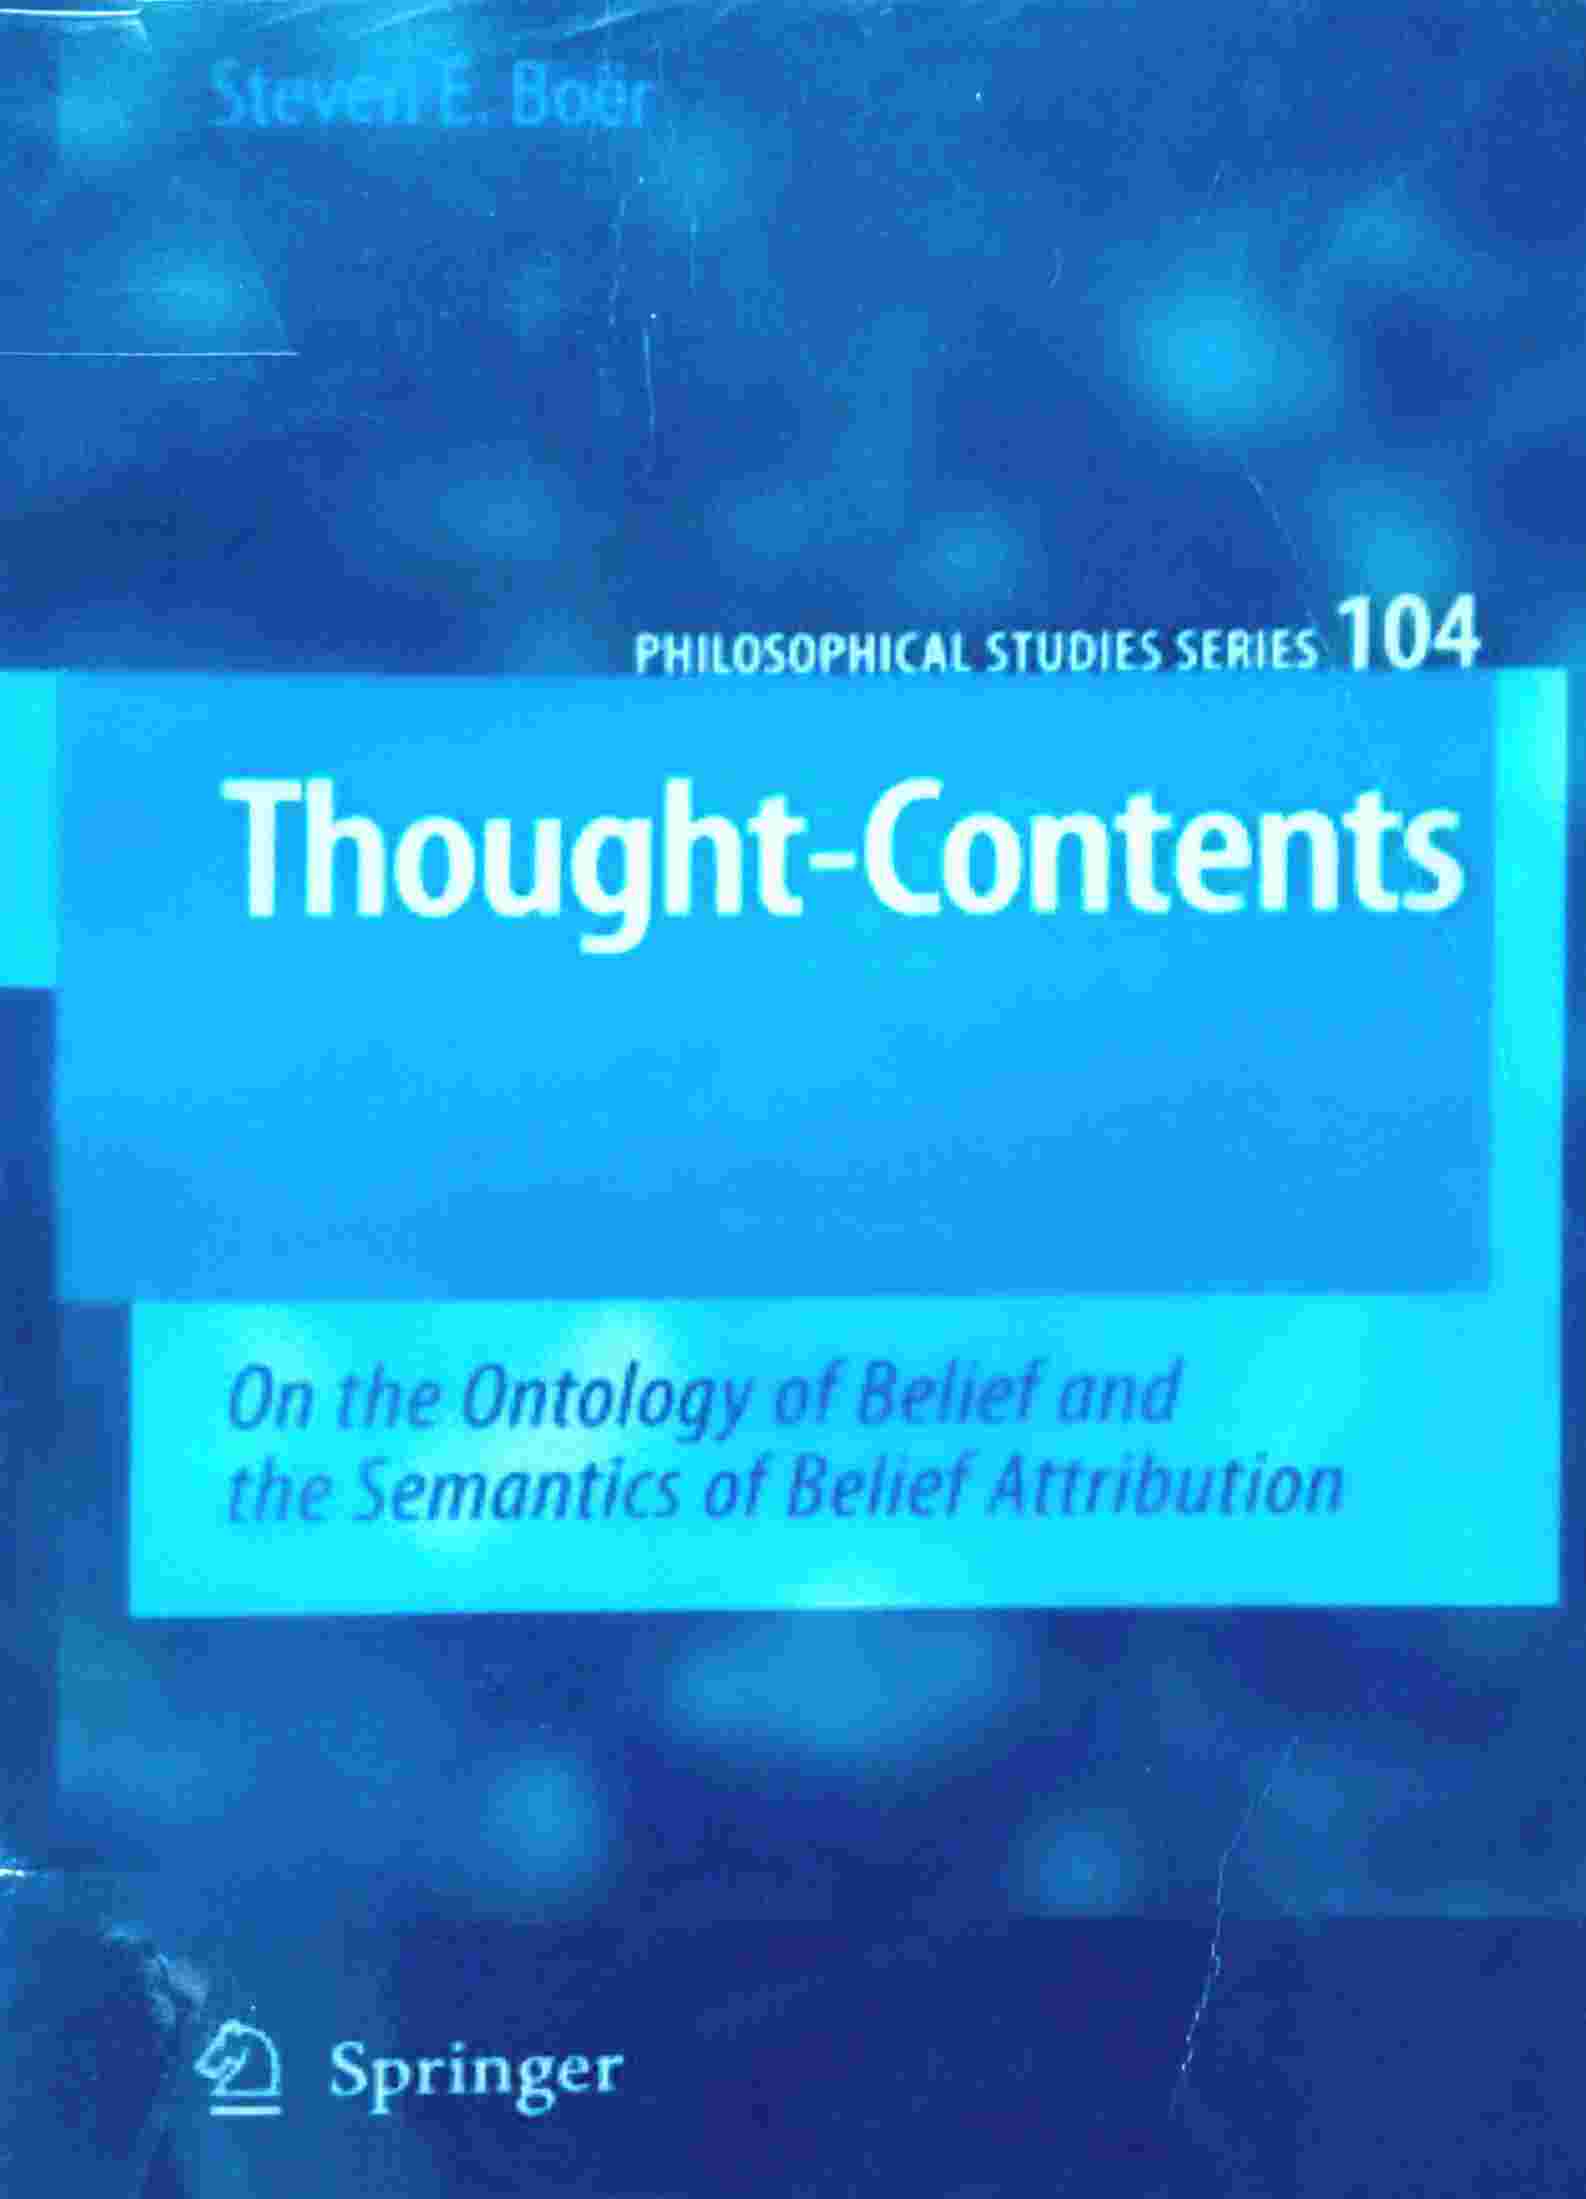 THOUGHT-CONTENTS